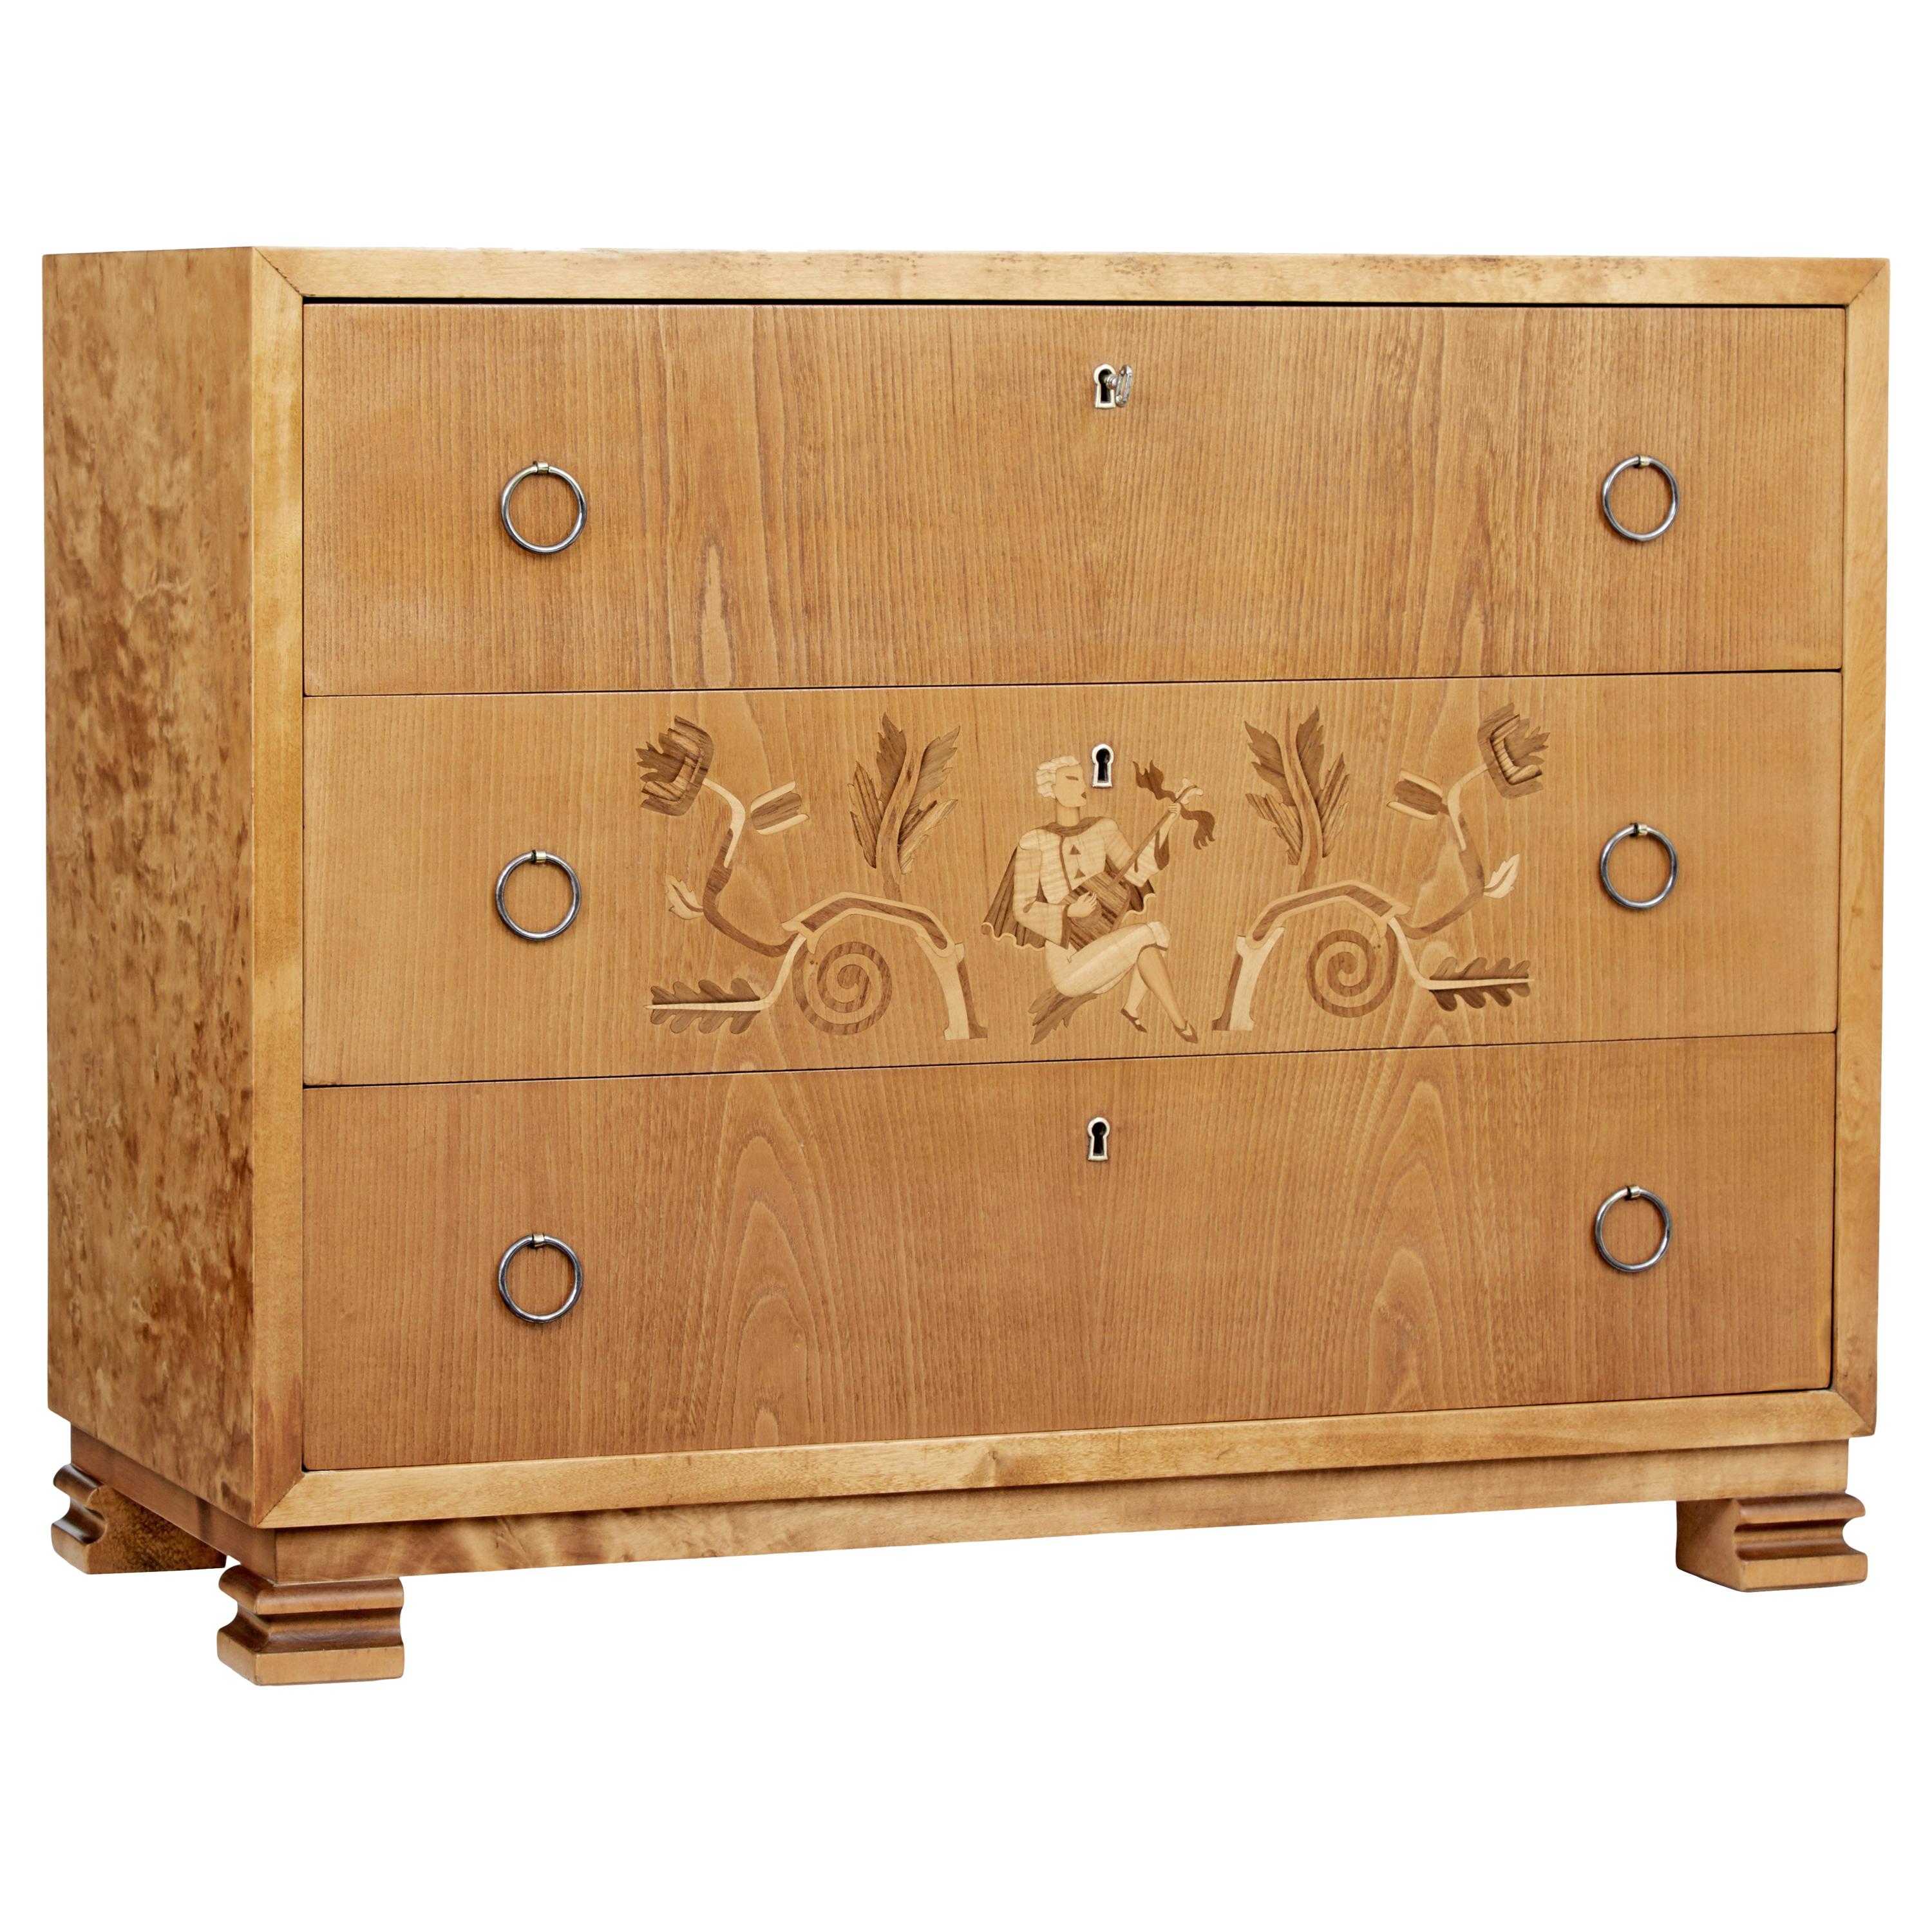 Mid-20th Century Elm and Birch Swedish Grace Chest of Drawers